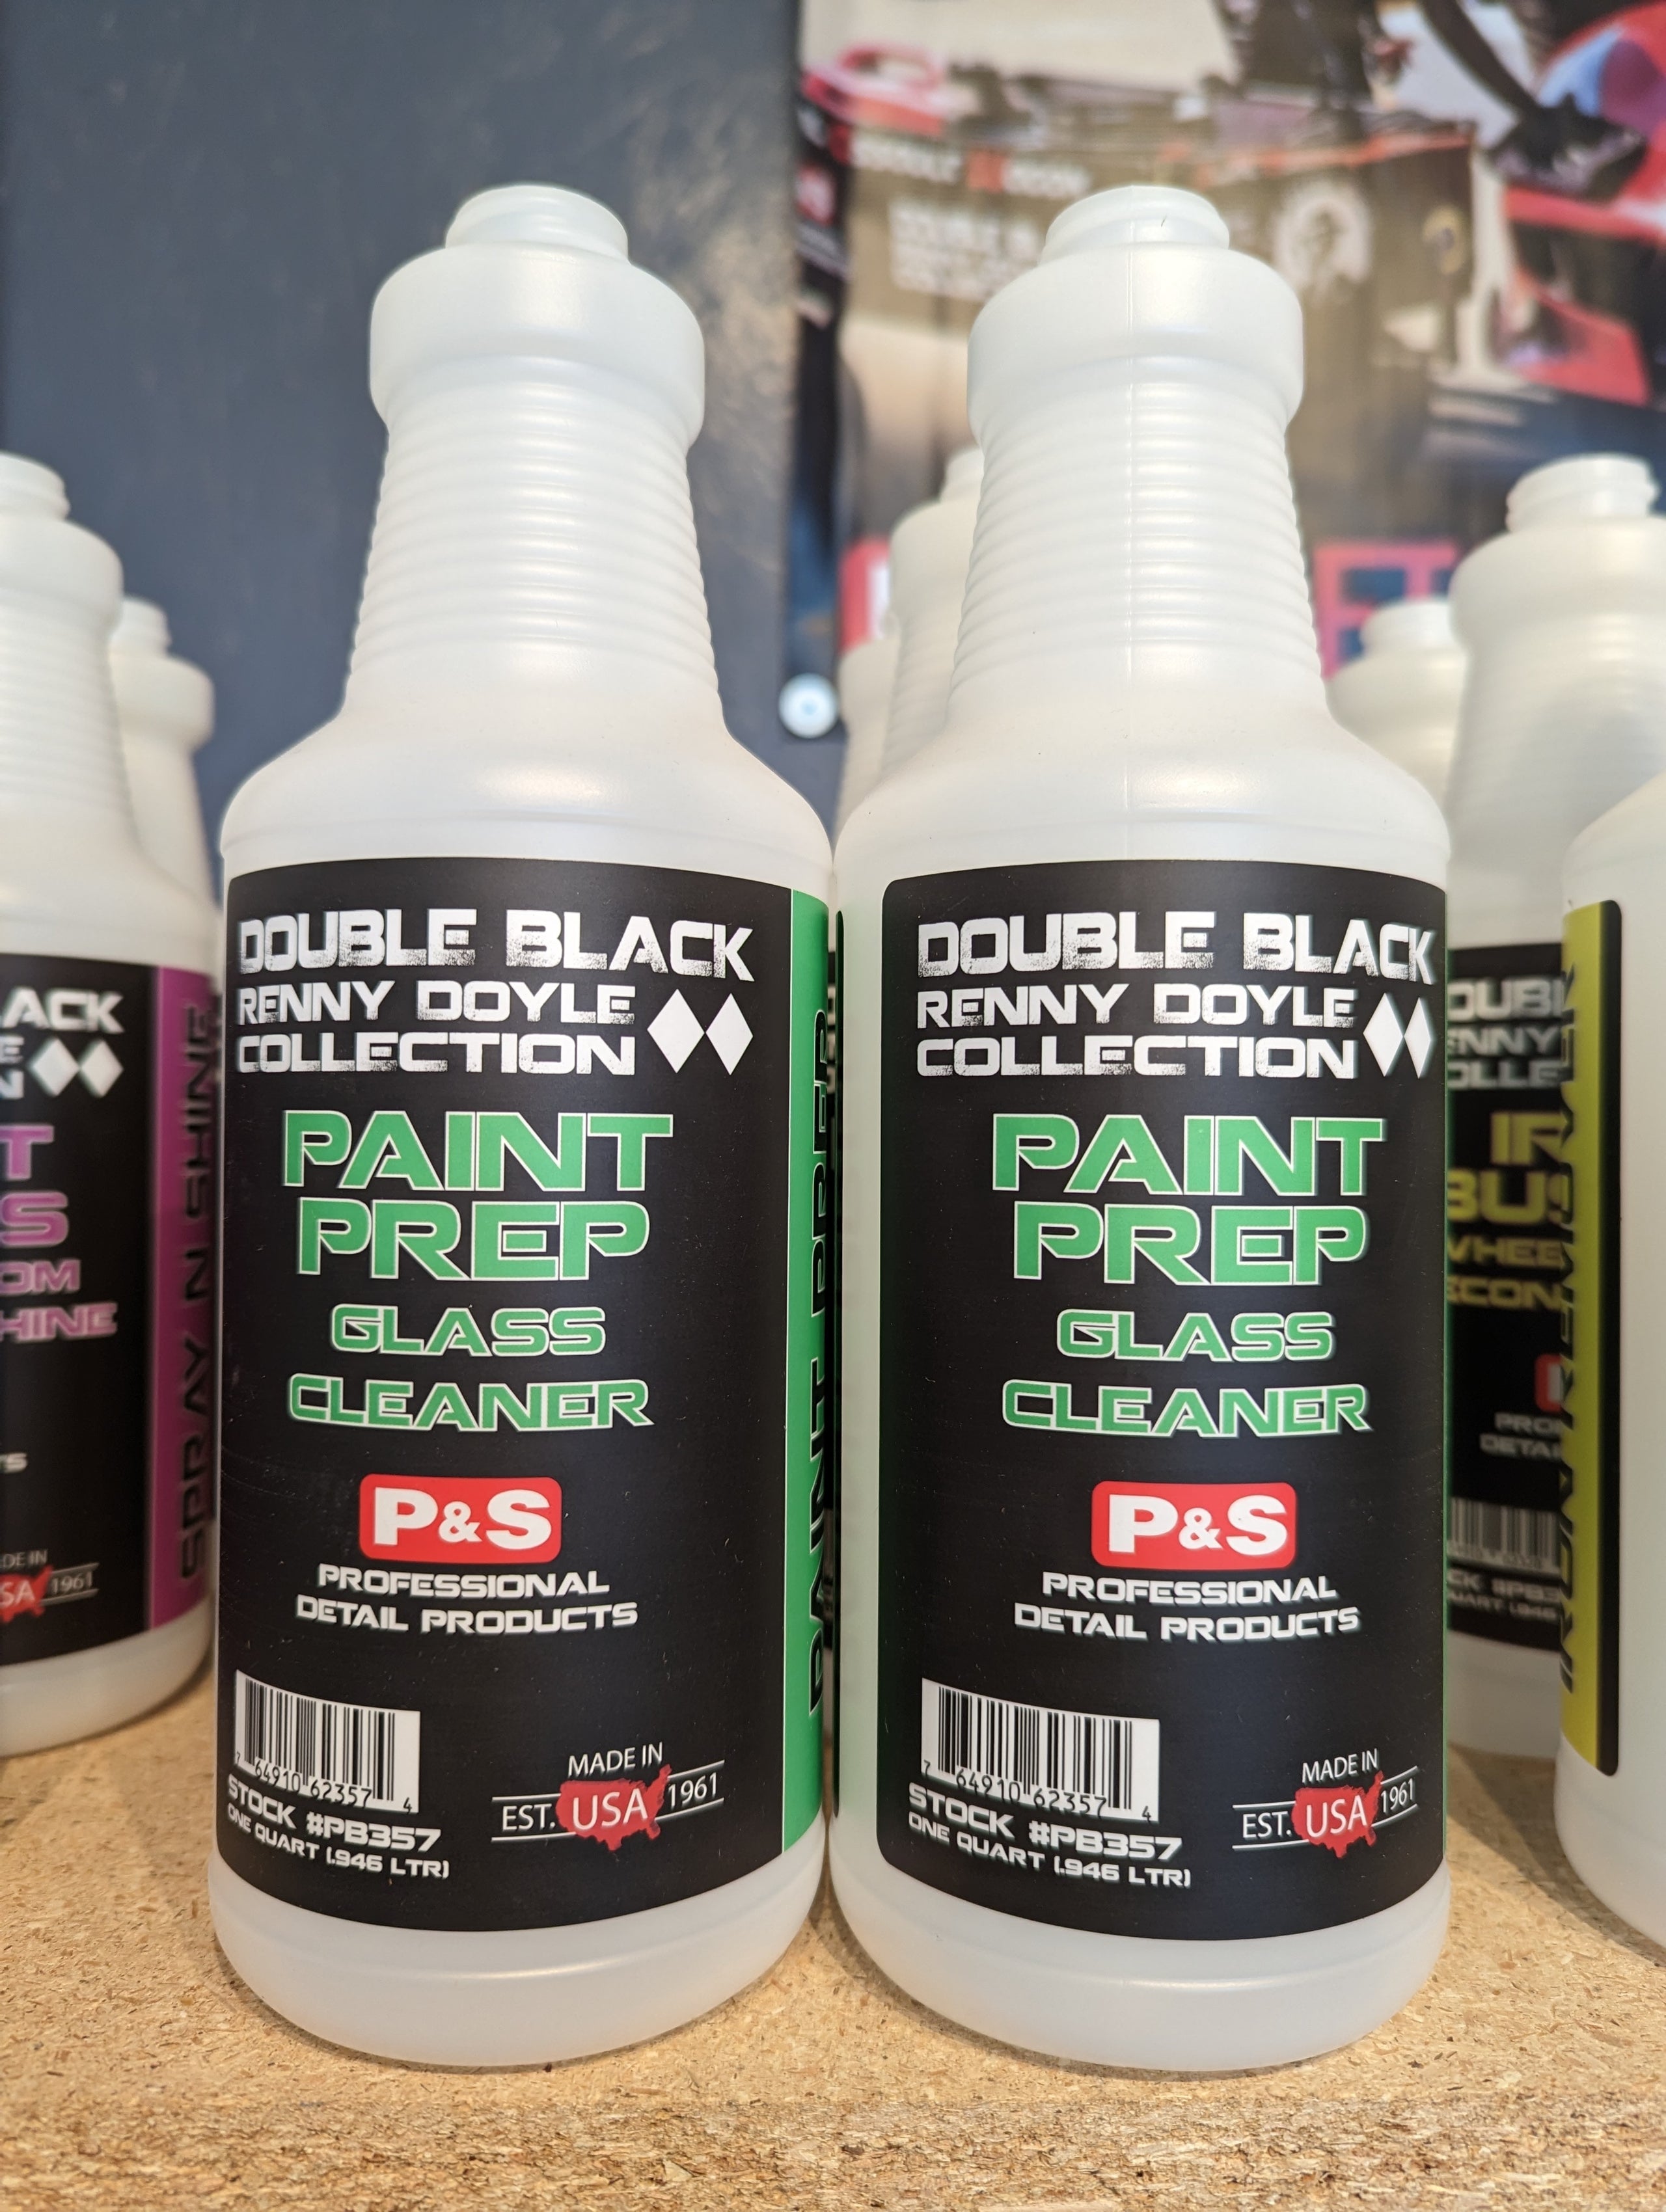 P&S Paint Prep And Glass Cleaner 1 GAL